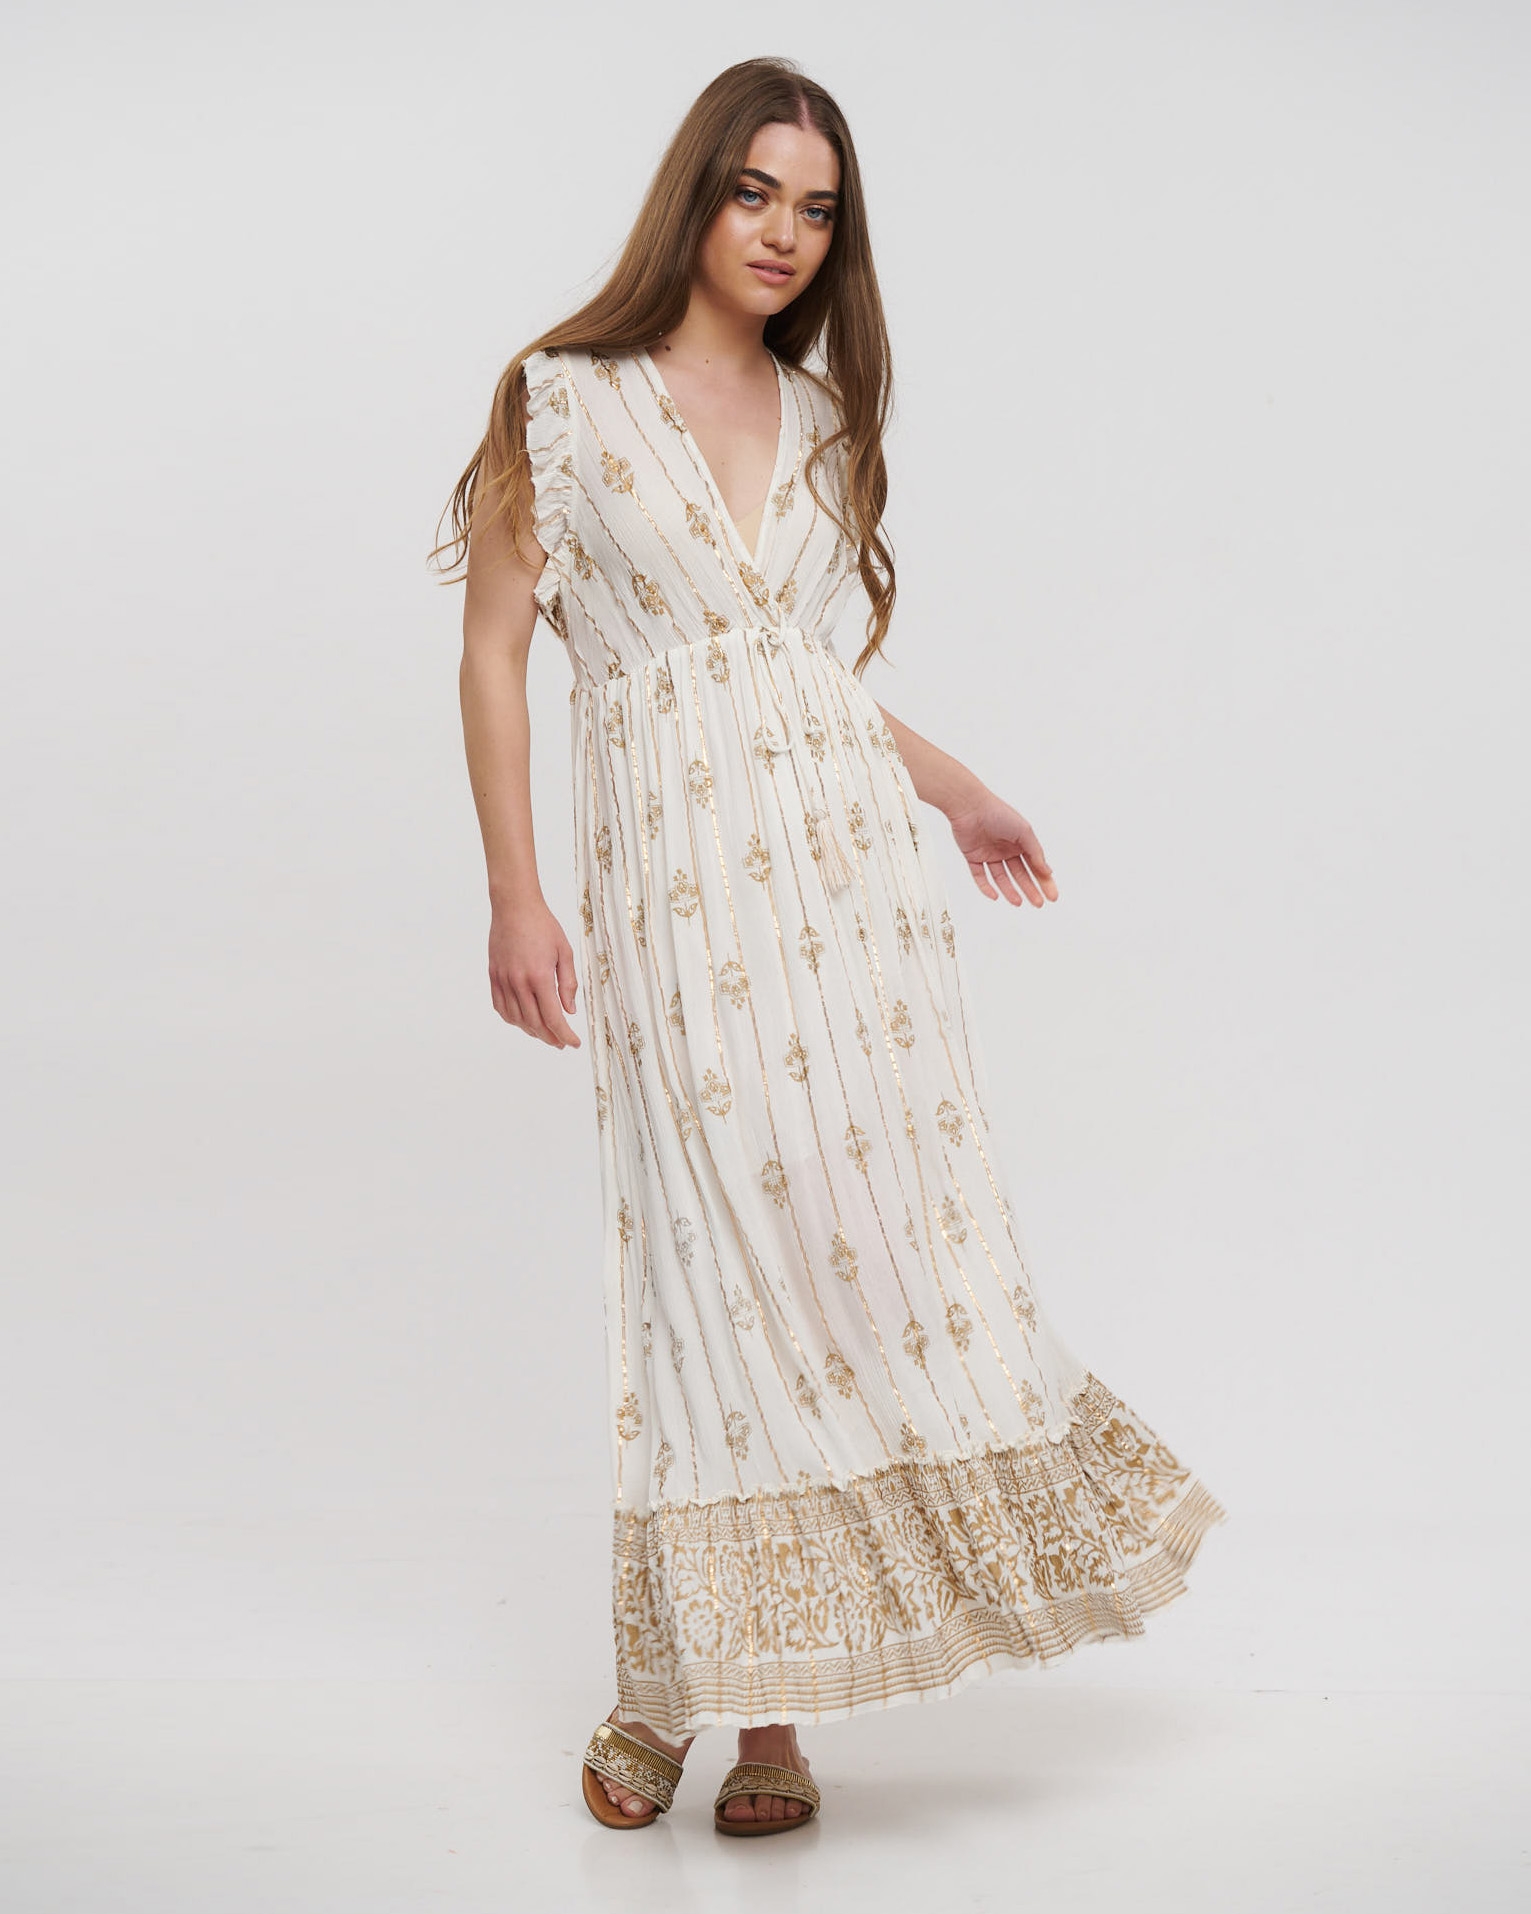 Dress With Ruffles And Golden Design BLE RESORT COLLECTION